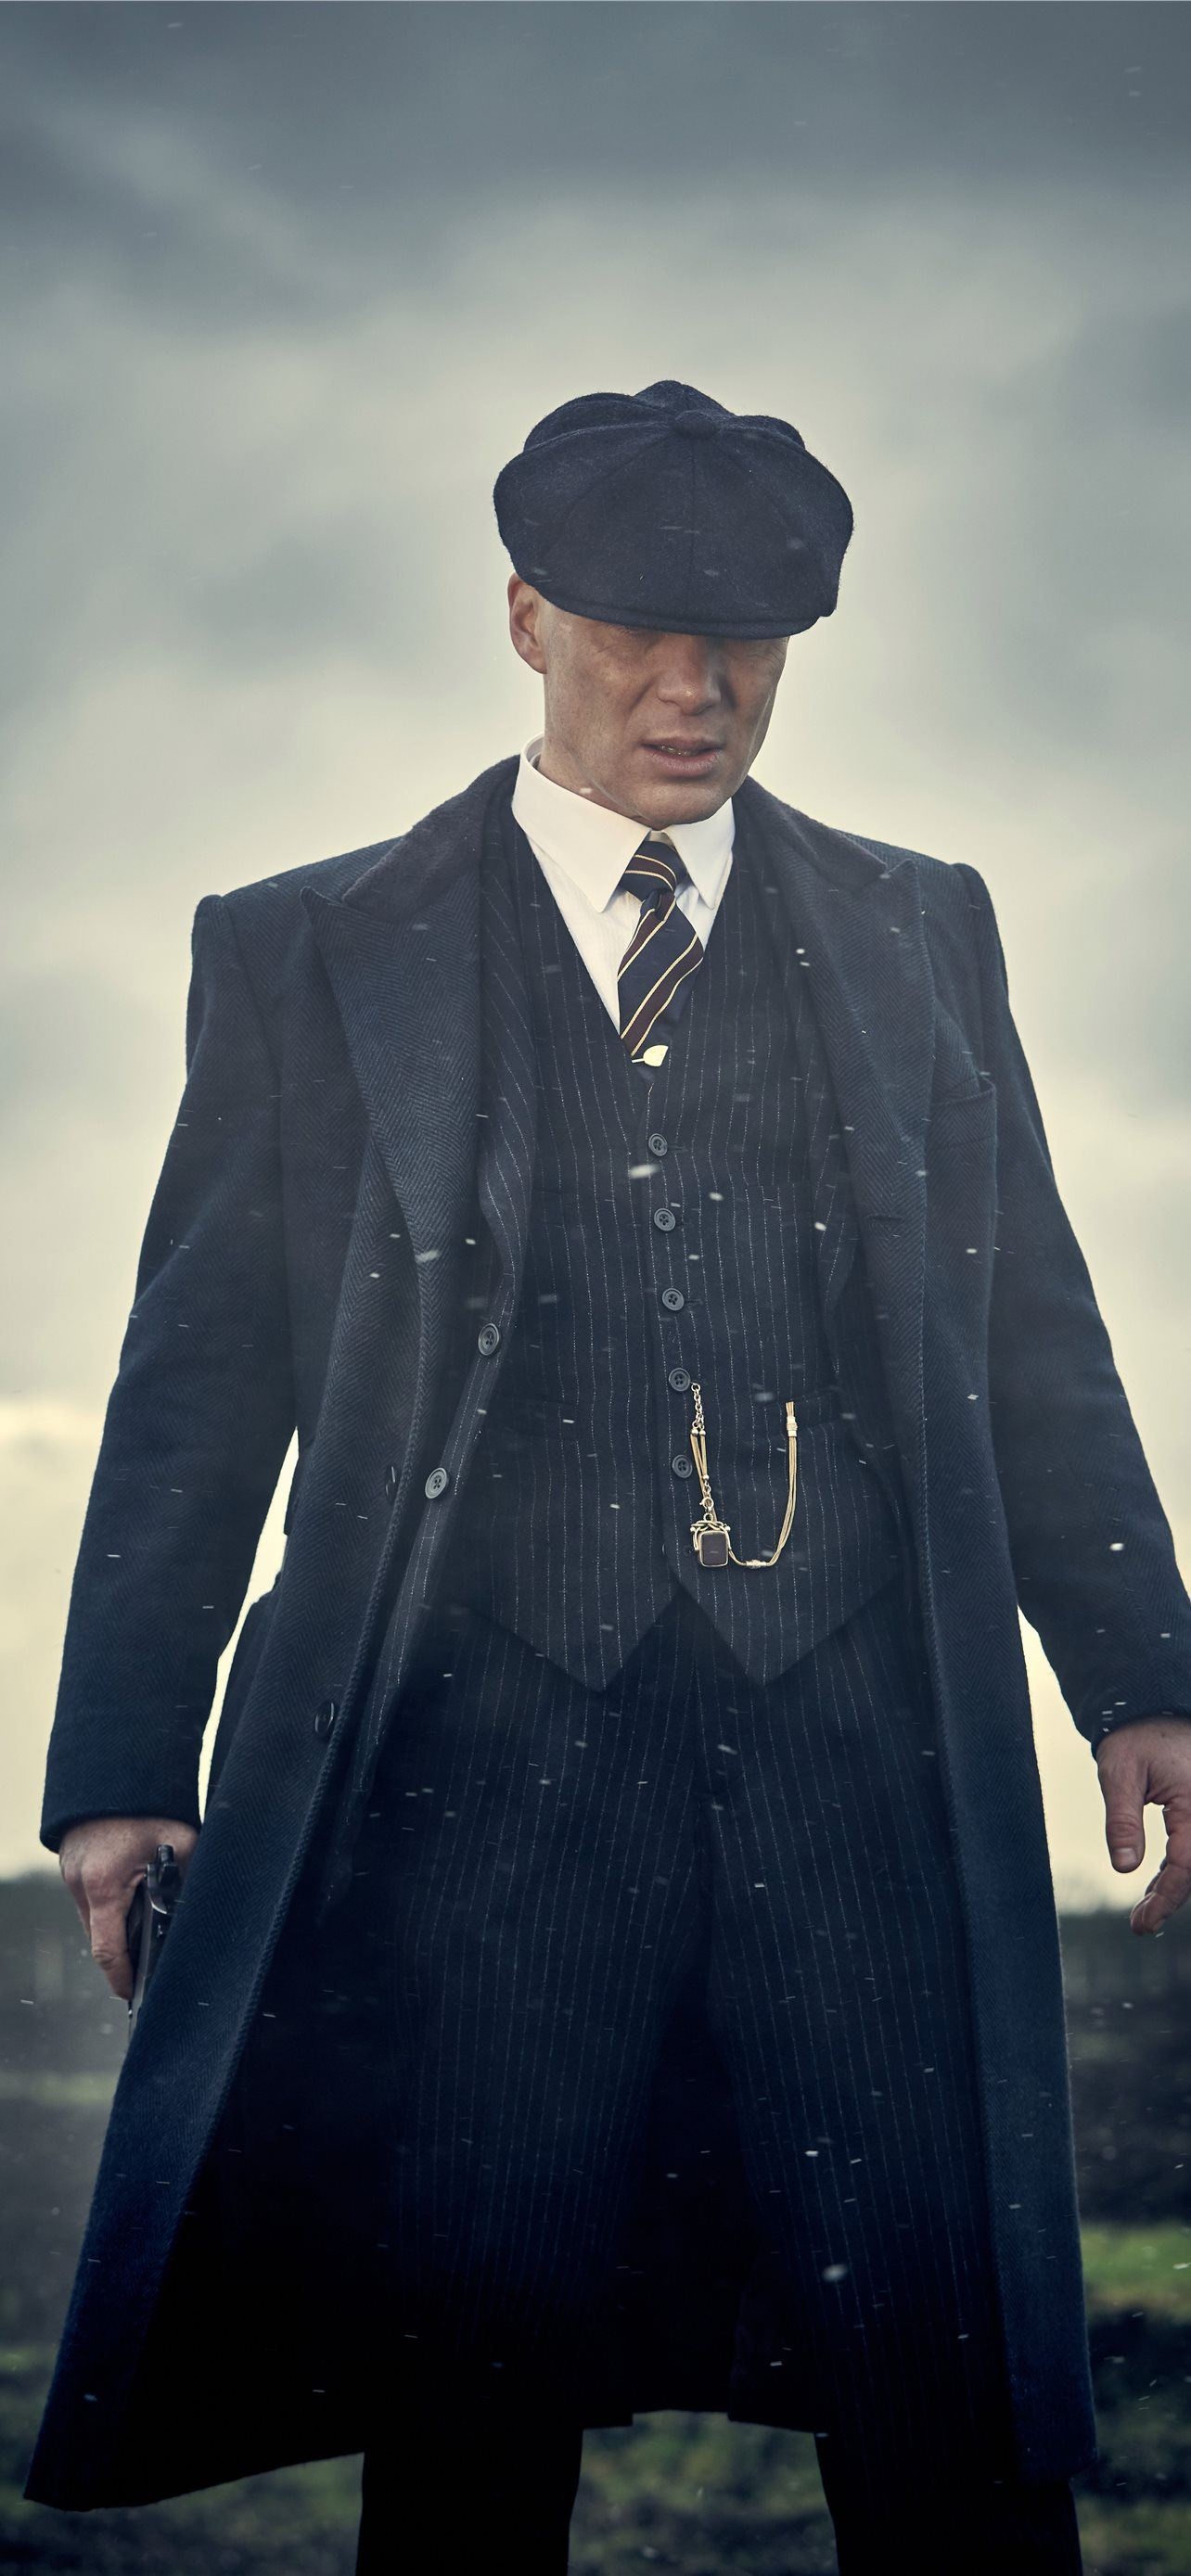 Latest Peaky Blinders, iPhone HD wallpapers, Stylish designs, Mobile backgrounds, 1290x2780 HD Phone